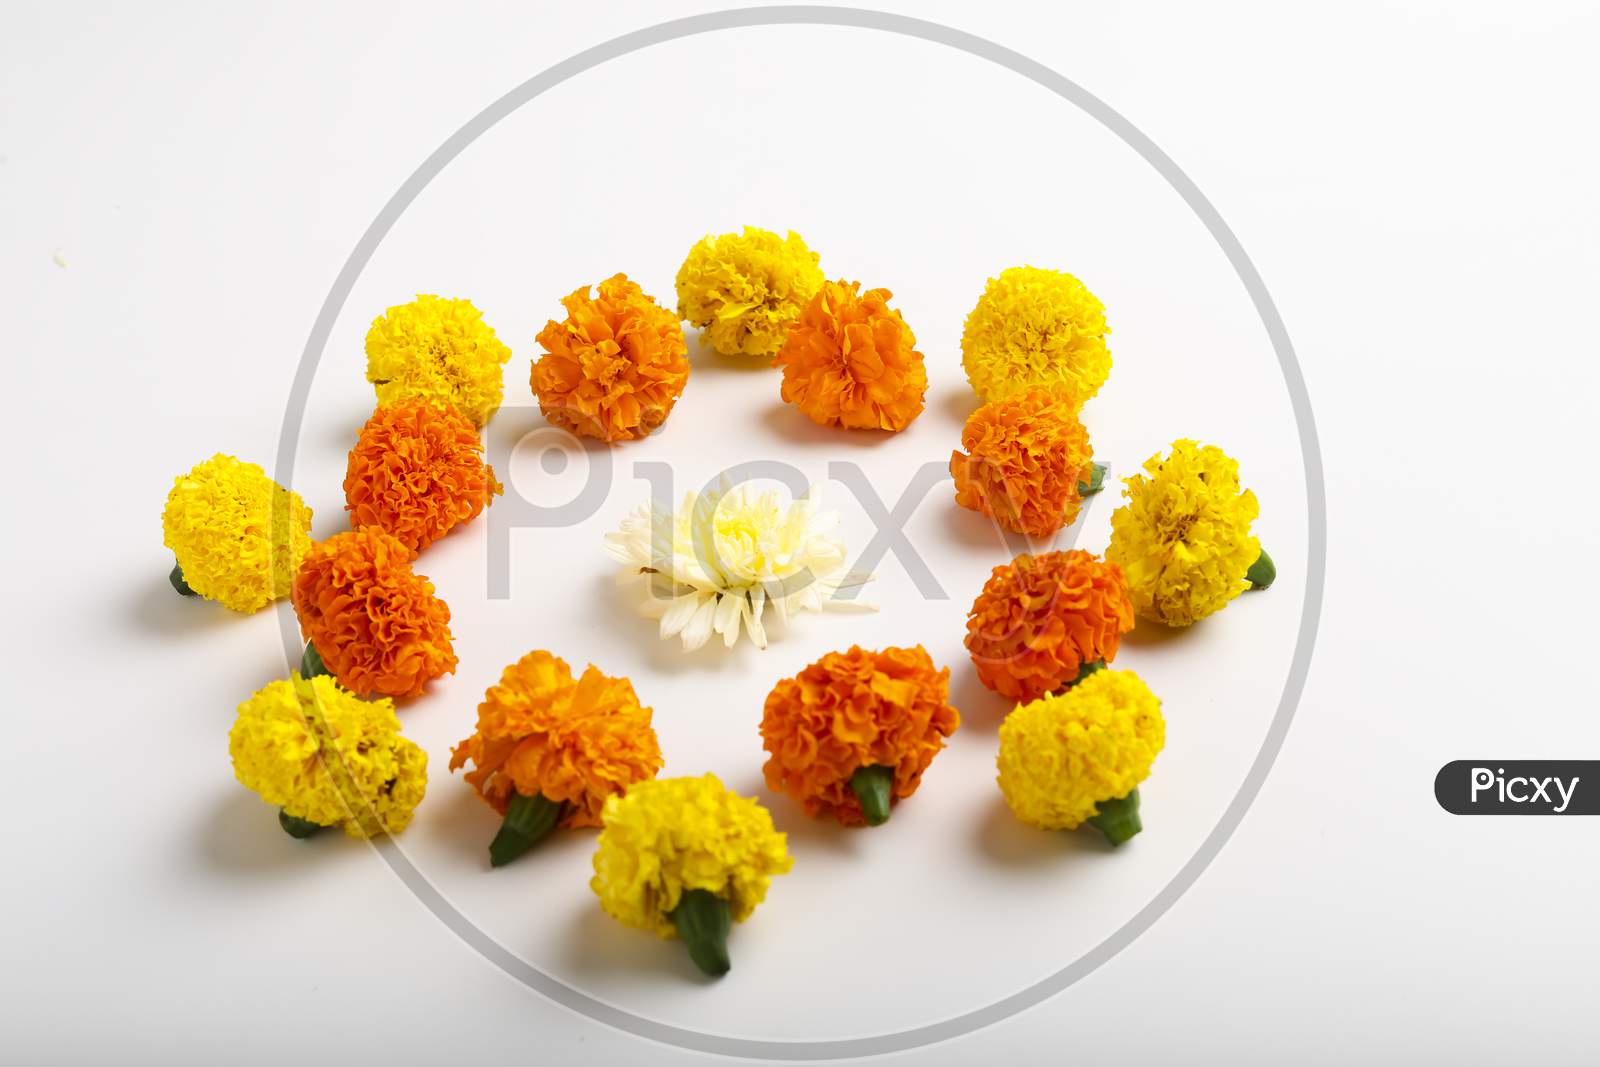 Buy Blissful decor presents Lotus with Marigold Flowers Hanging tea light  Holder for / Front Door / Entryway / Terrace / Diyas for Decoration Diwali  Tealight Holder, Diwali Decorations, Diwali Decor, Diwali